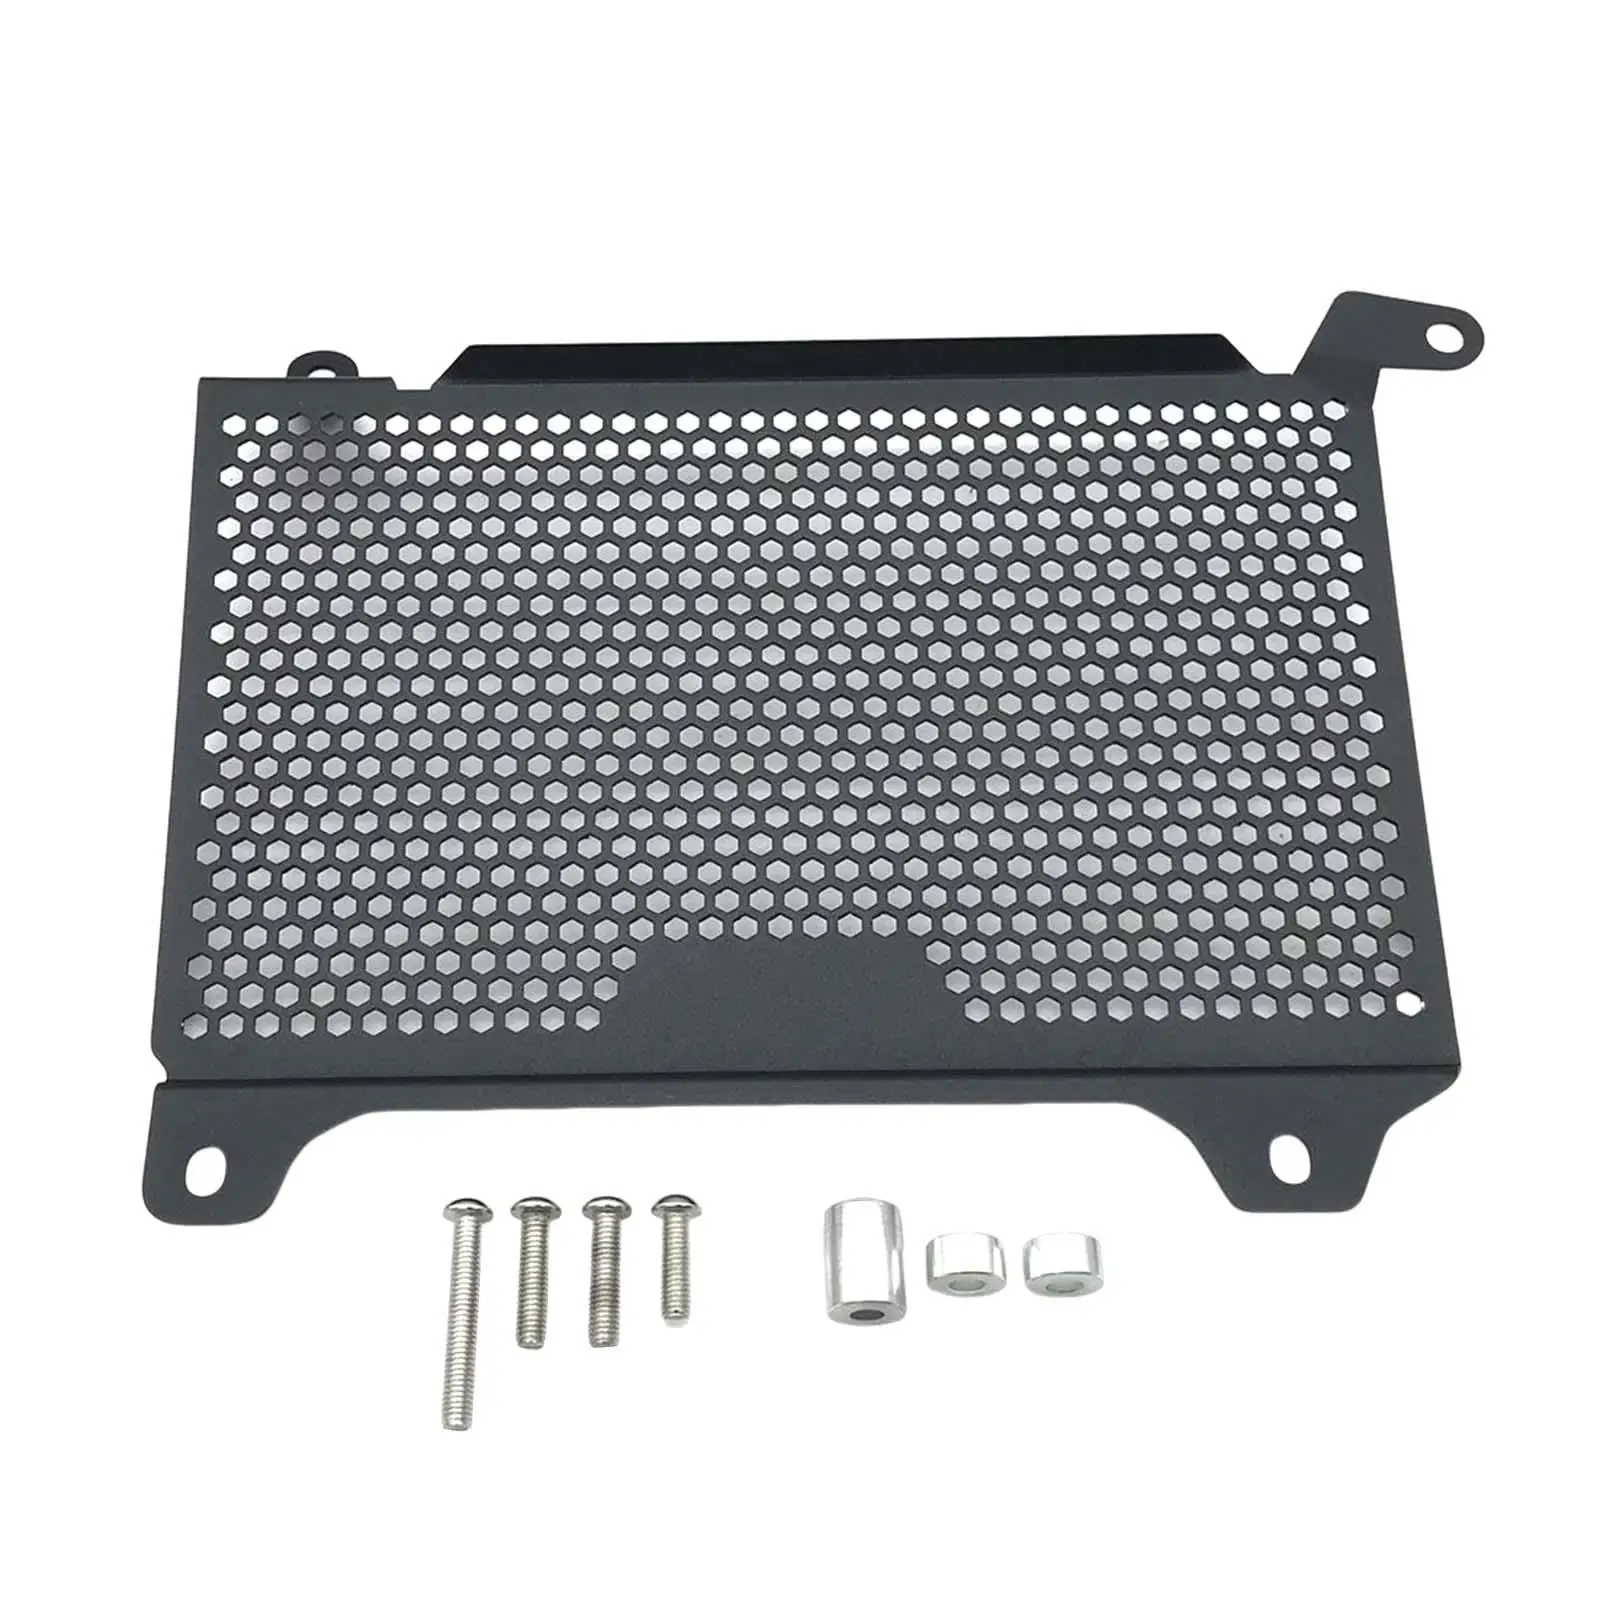  Radiator Grille Protection for Honda 0x 0F x Easy to Install